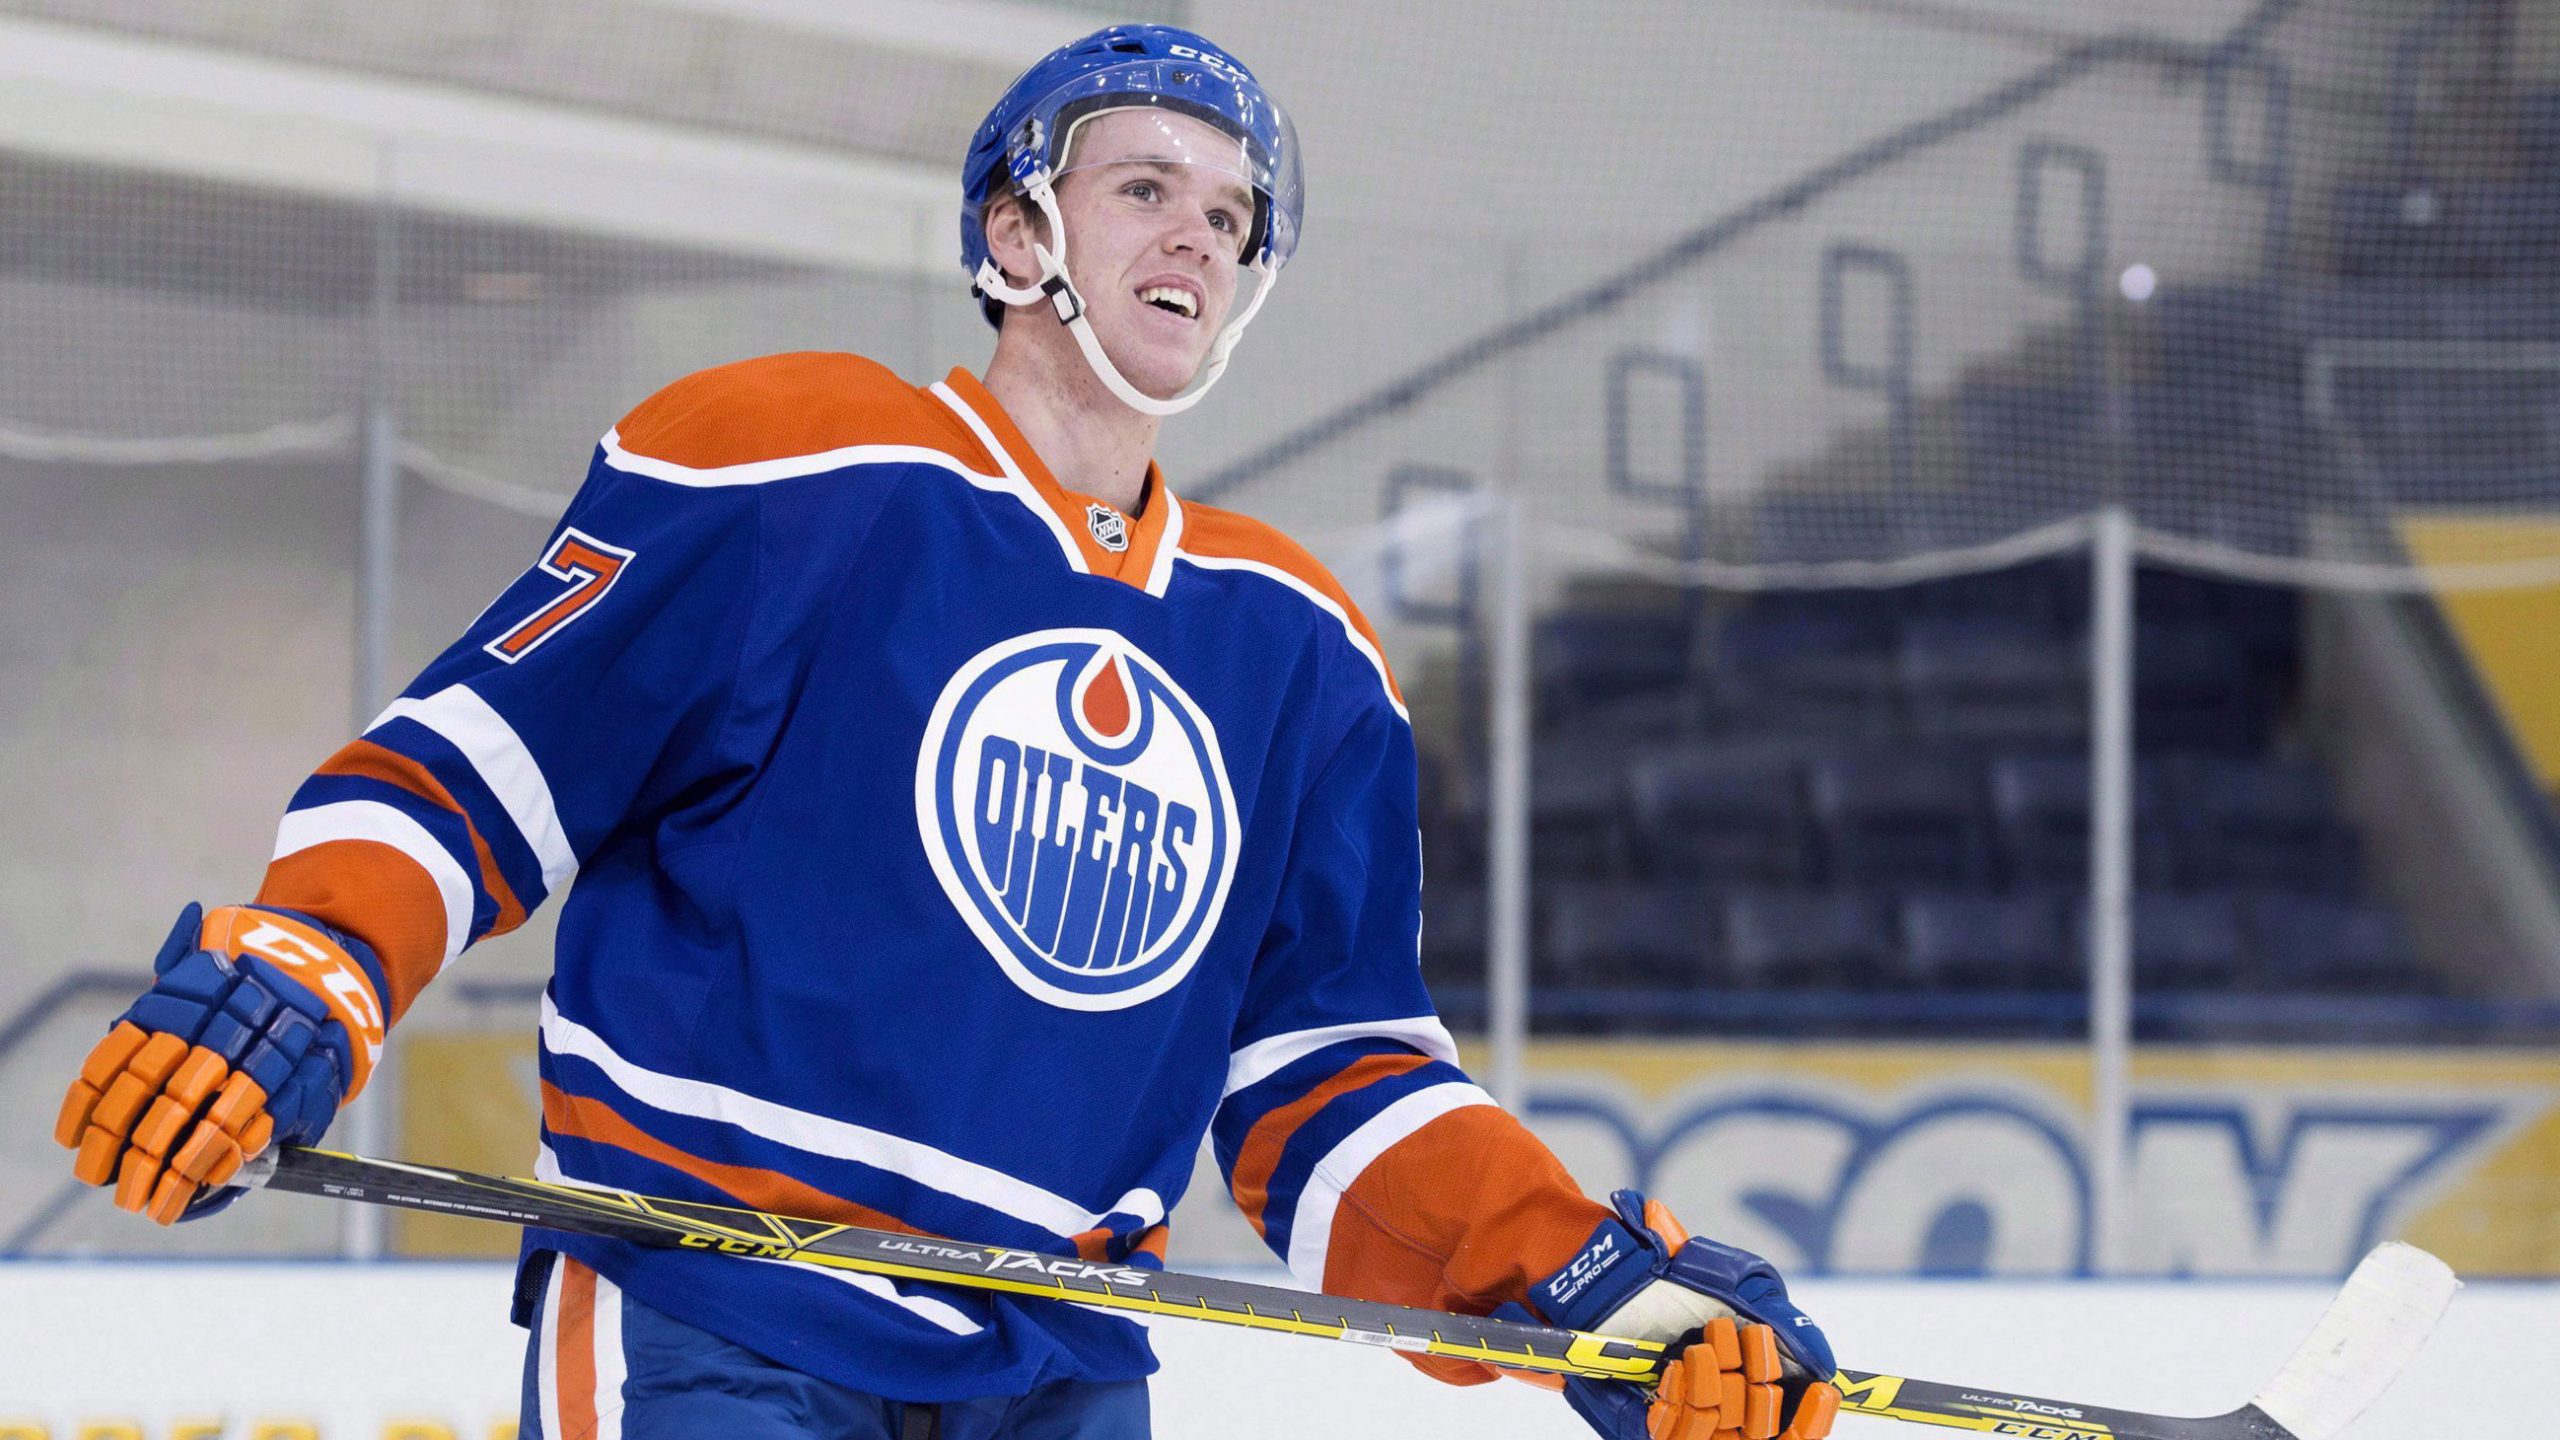 From 1 to 300, Connor McDavid is in the company of NHL greats